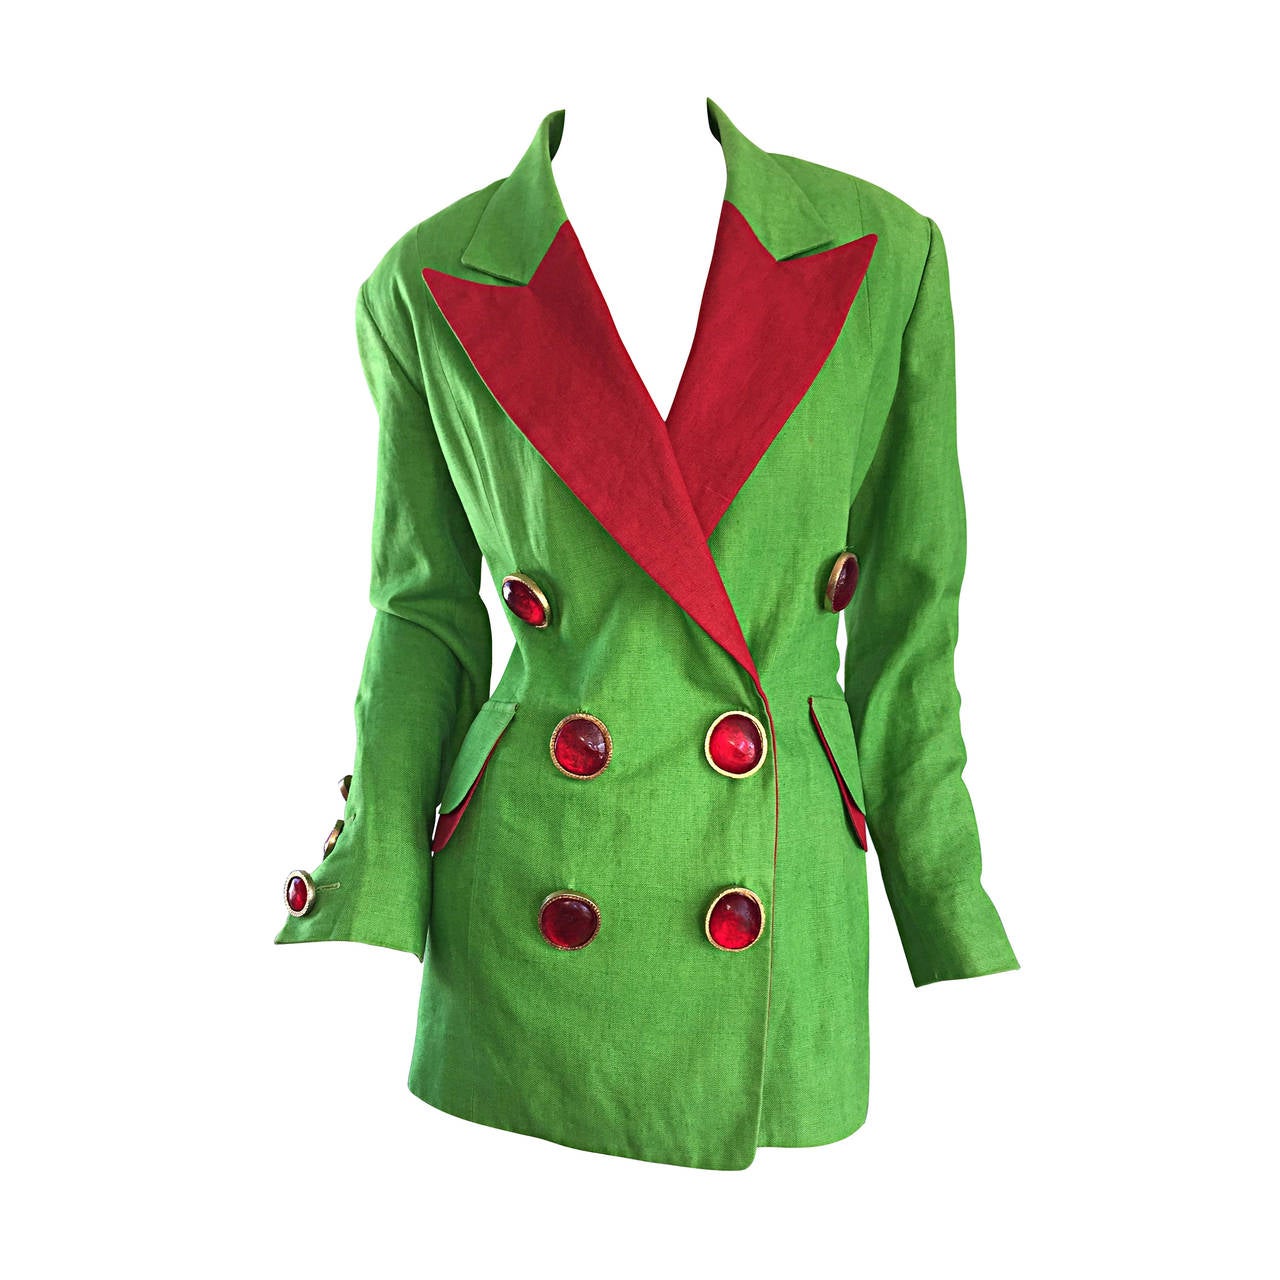 Incredible Vintage Gemma Kahng Green + Red Blazer w/ Gripoix Buttons